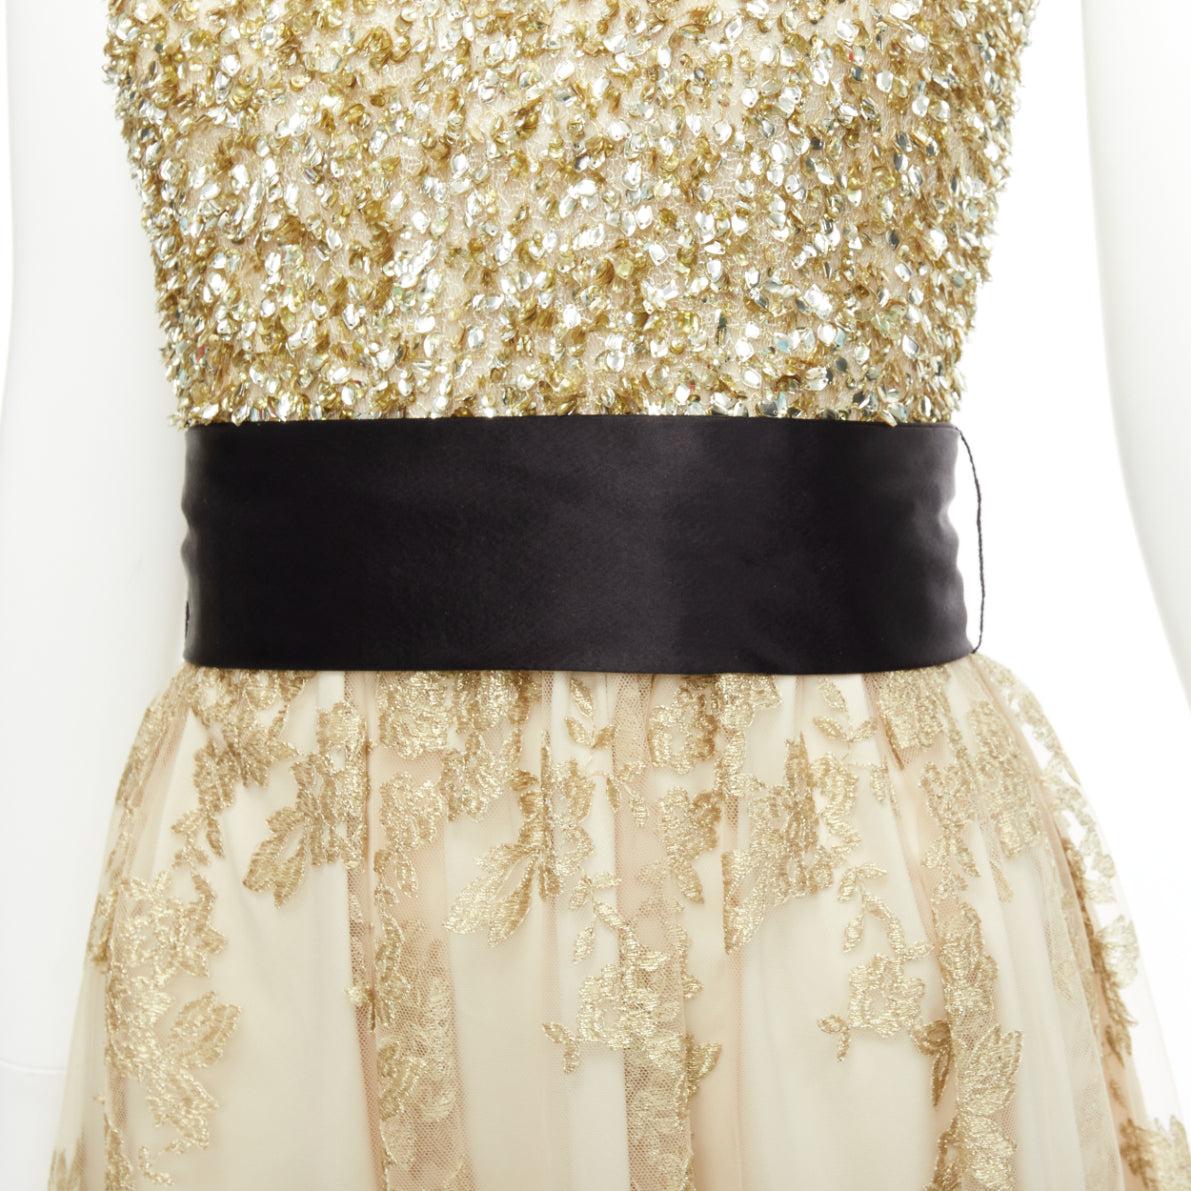 BADGLEY MISCHKA gold sequins top floral lace overlay belted gown dress US6 M
Reference: MAFK/A00007
Brand: Badgley Mischka
Material: Polyester, Blend
Color: Gold
Pattern: Sequins
Closure: Zip
Lining: Gold Fabric
Extra Details: Back zip. Corset with